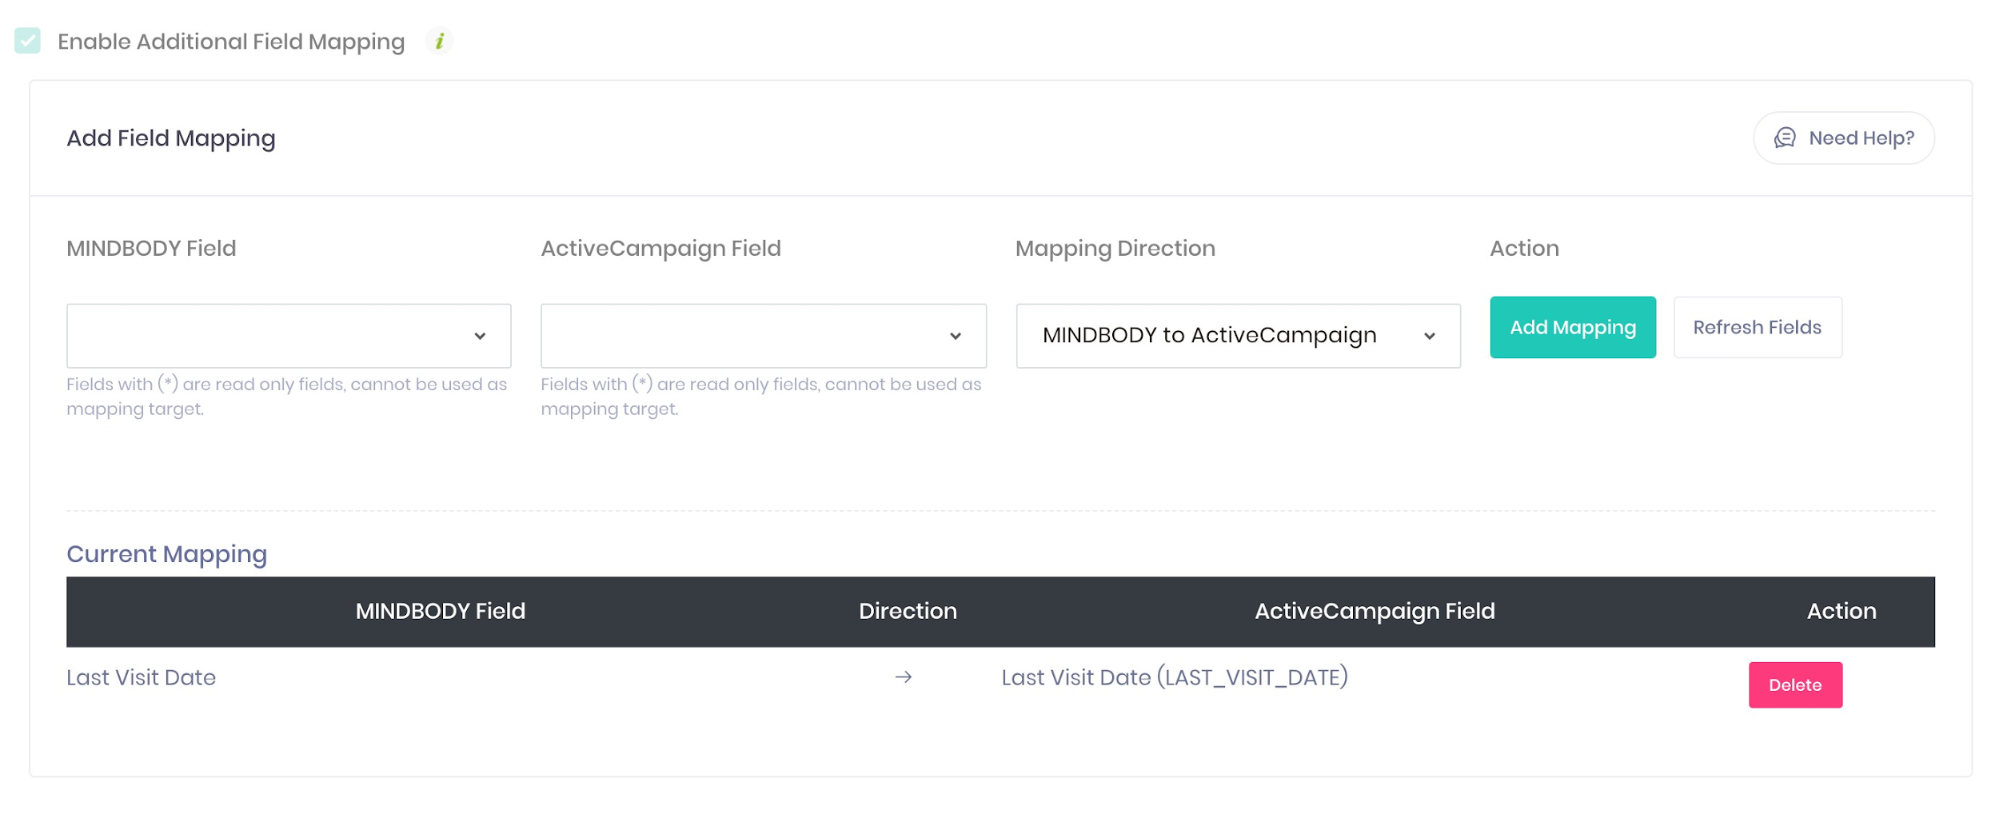 Field mapping feature for Mindbody to ActiveCampaign